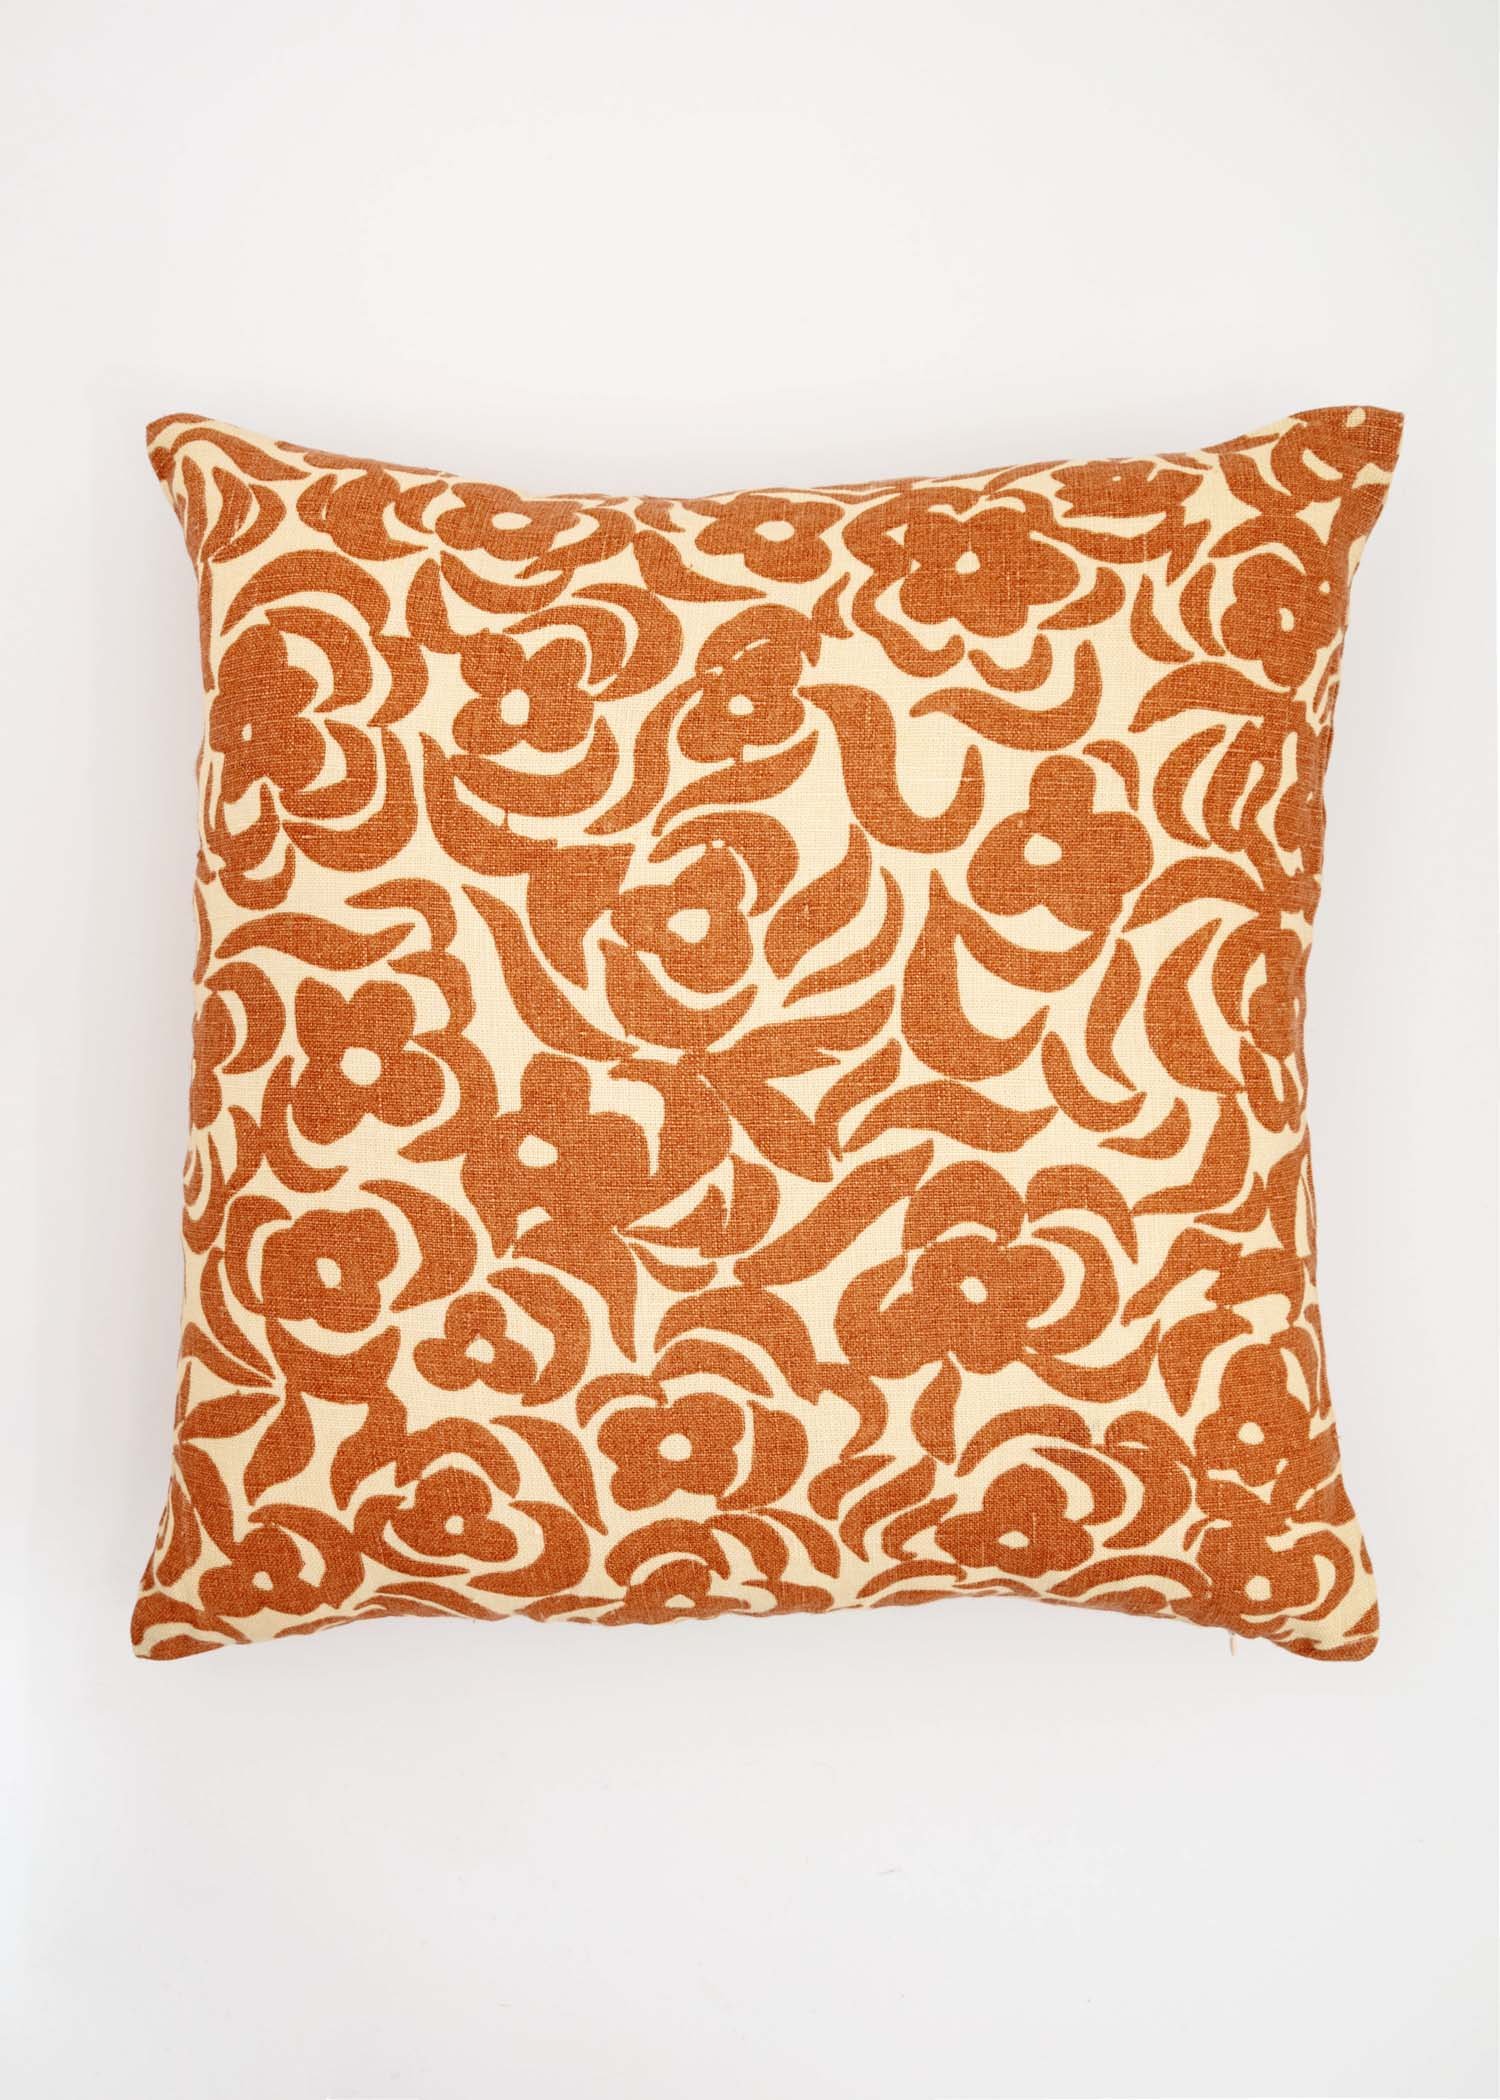 Patterned cushion cover